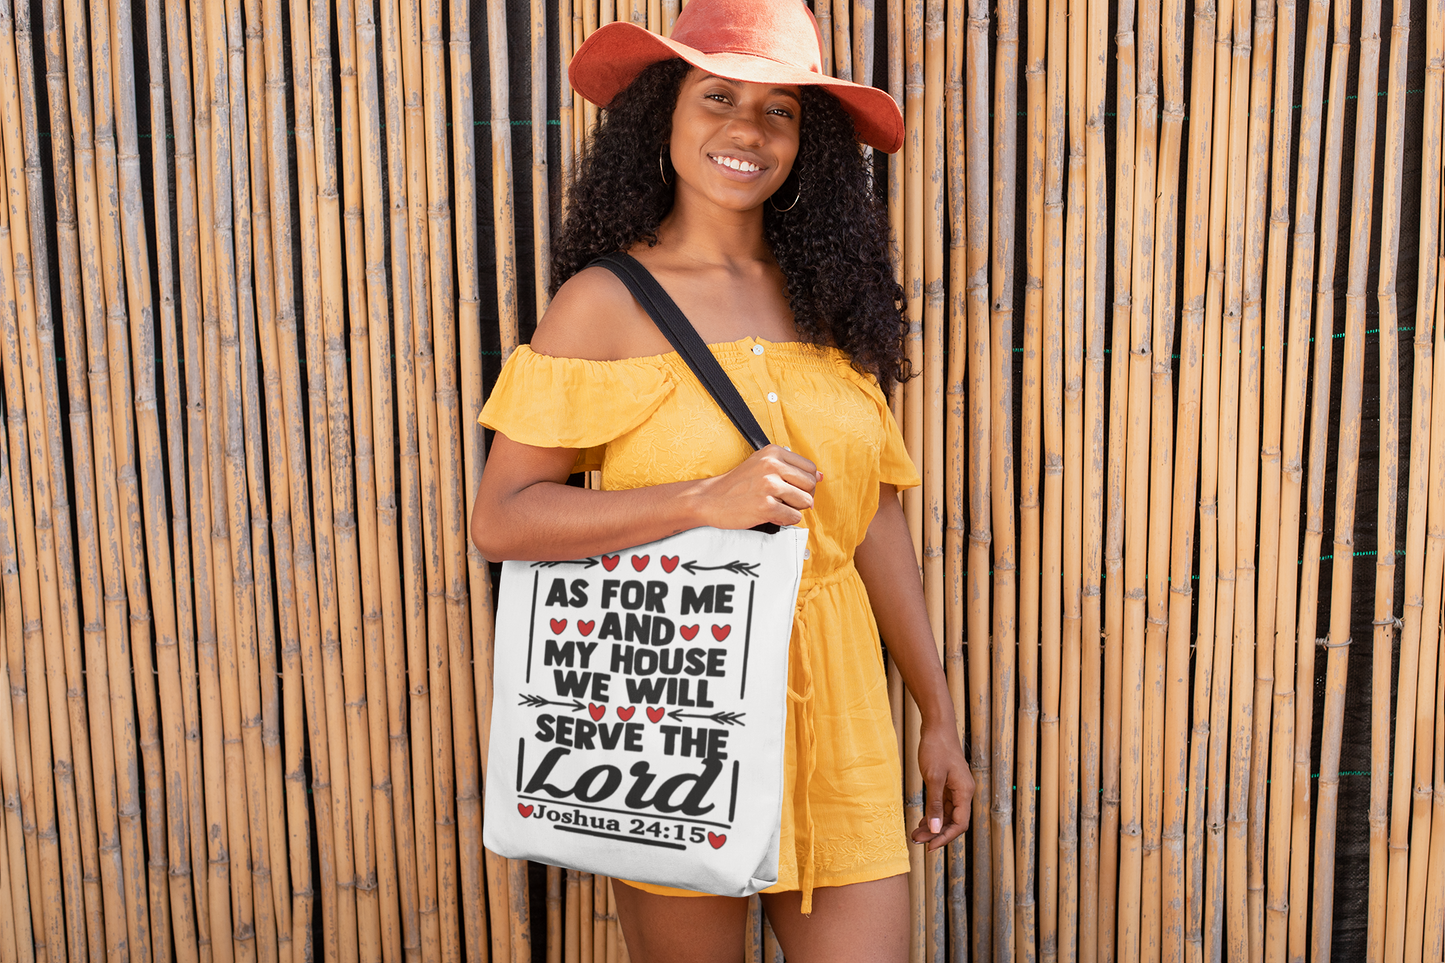 As For Me And My House We will Serve The Lord Jeremiah 24:15 Tote bag